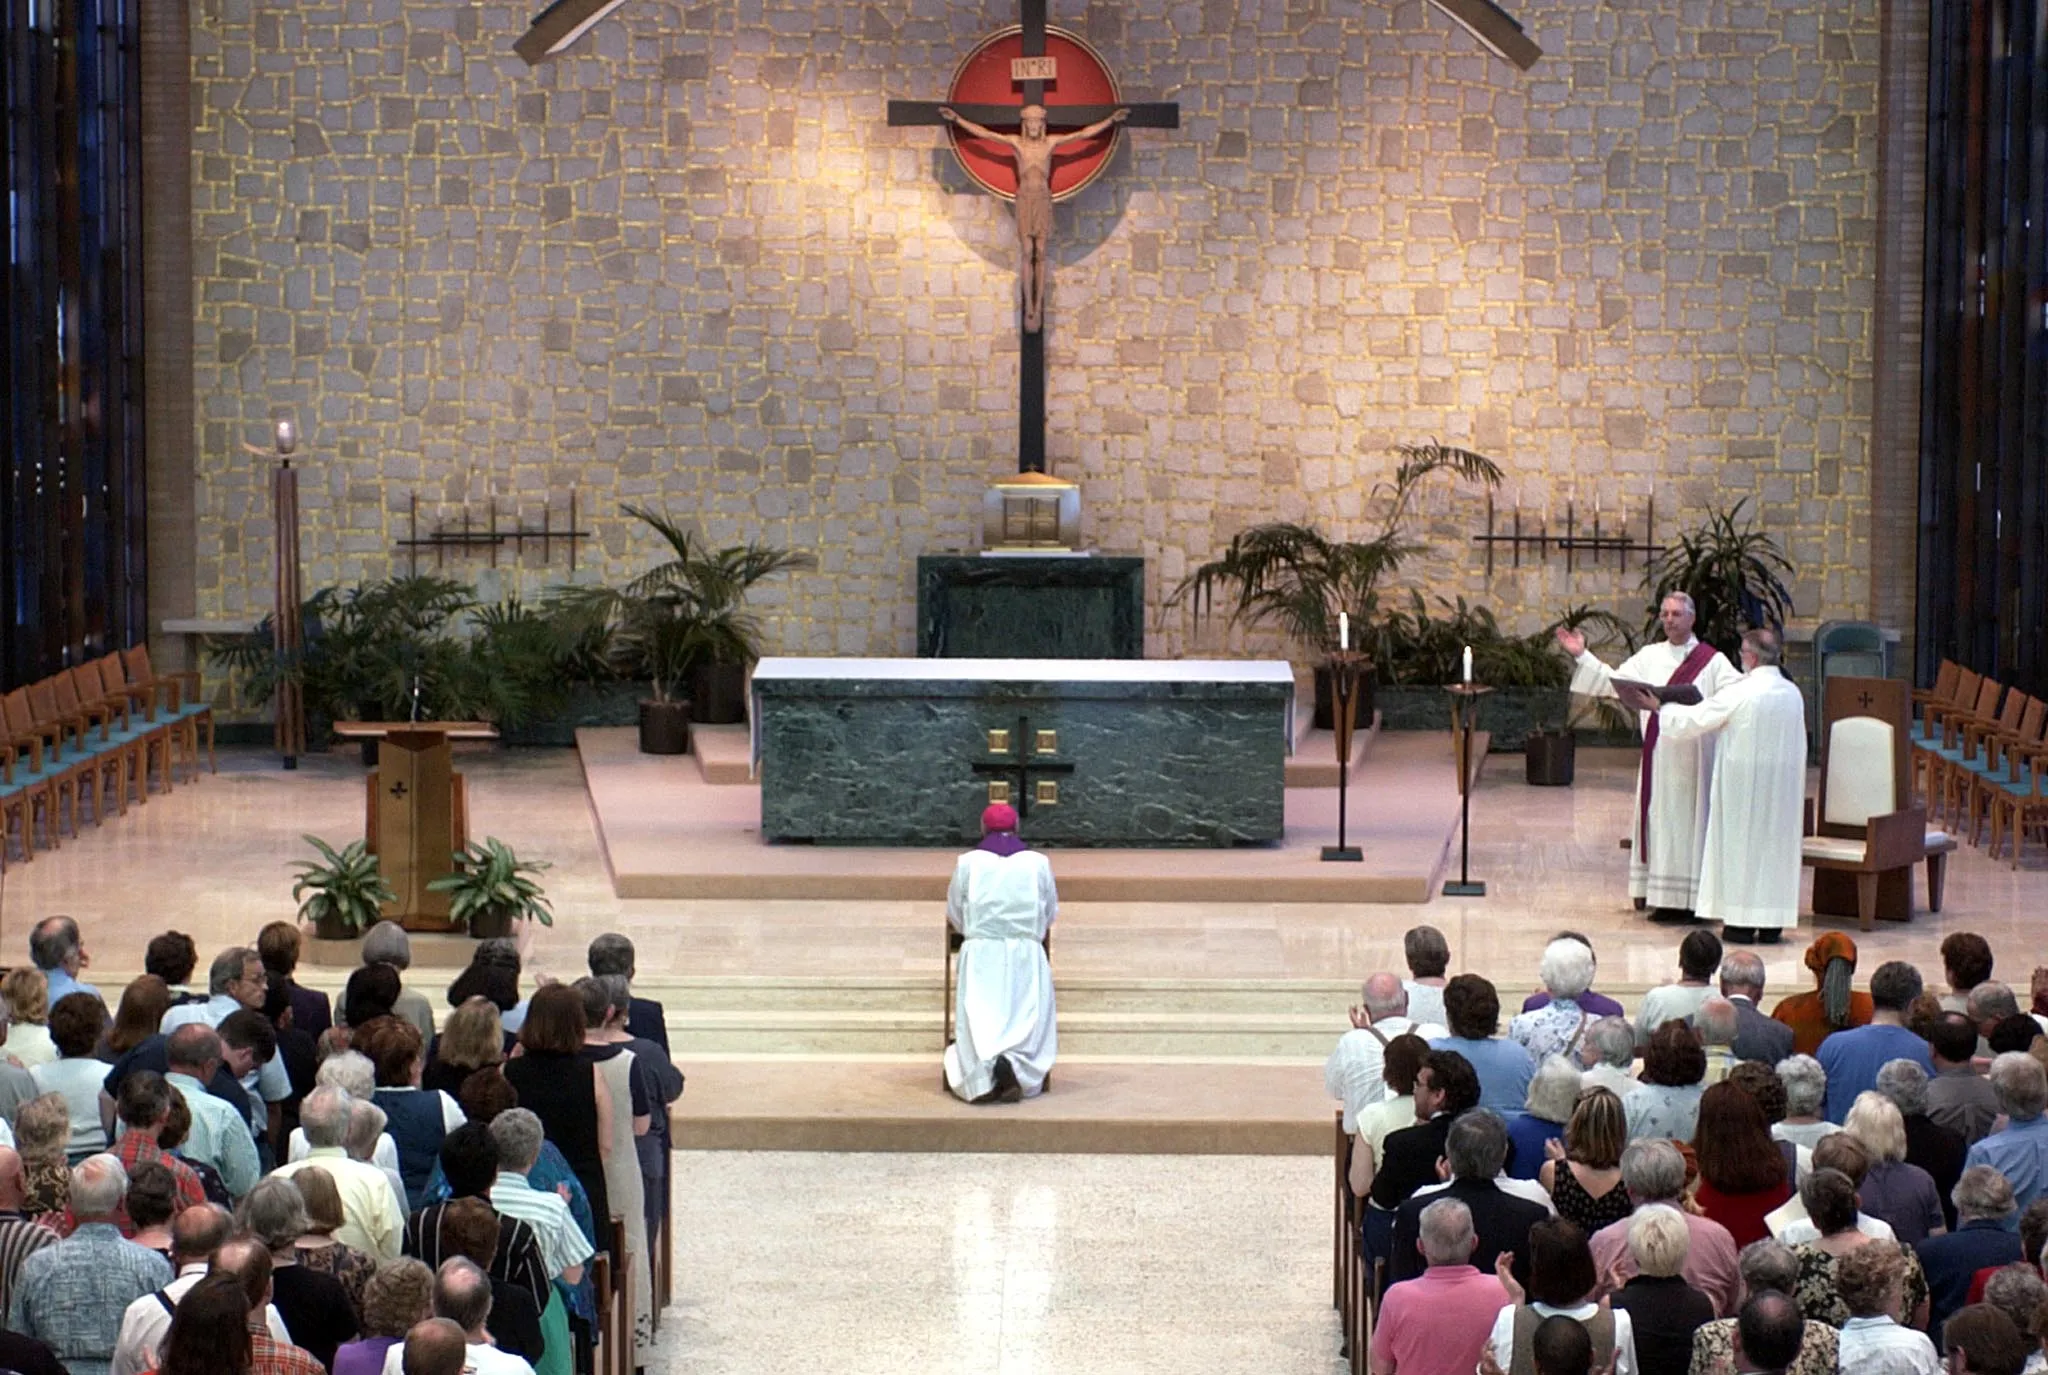 Former archbishop of Milwaukee, Wisconsin, Rembert Weakland kneels and prays as he is given a standing ovation of support after he apologized publicly for sexual indiscretions during a prayer service May 31, 2002 in St. Francis, Wisconsin. Weakland admitted to having a relationship with and paying $450,000 to former seminary student Paul Marcoux.?w=200&h=150